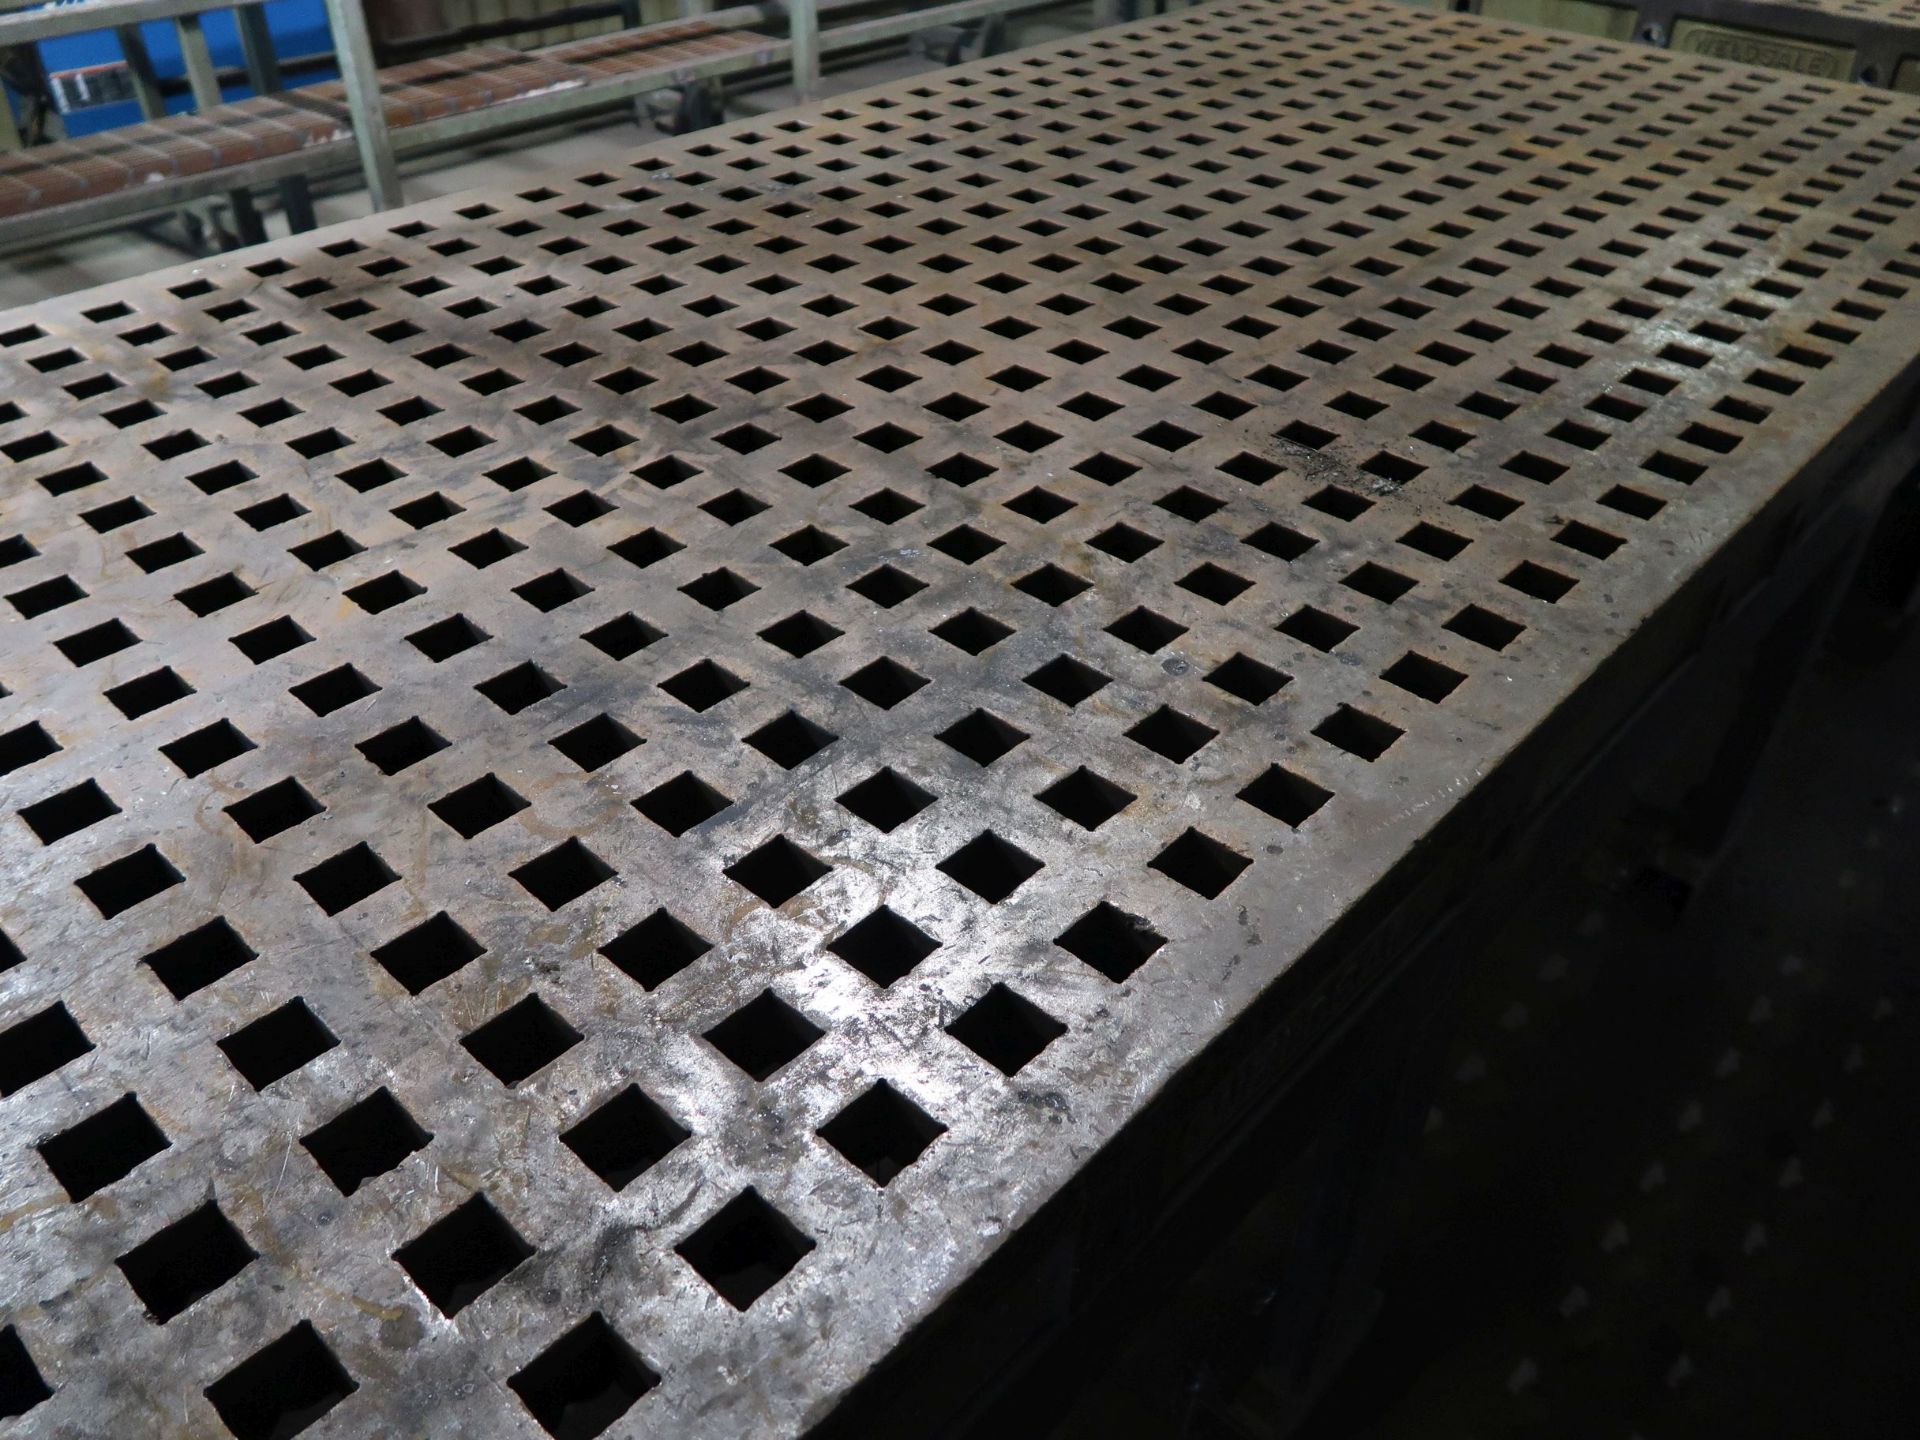 60" X 120" X 6" THICK X 36" HIGH WELDSALE ACORN STYLE WELDING TABLE - Image 2 of 2